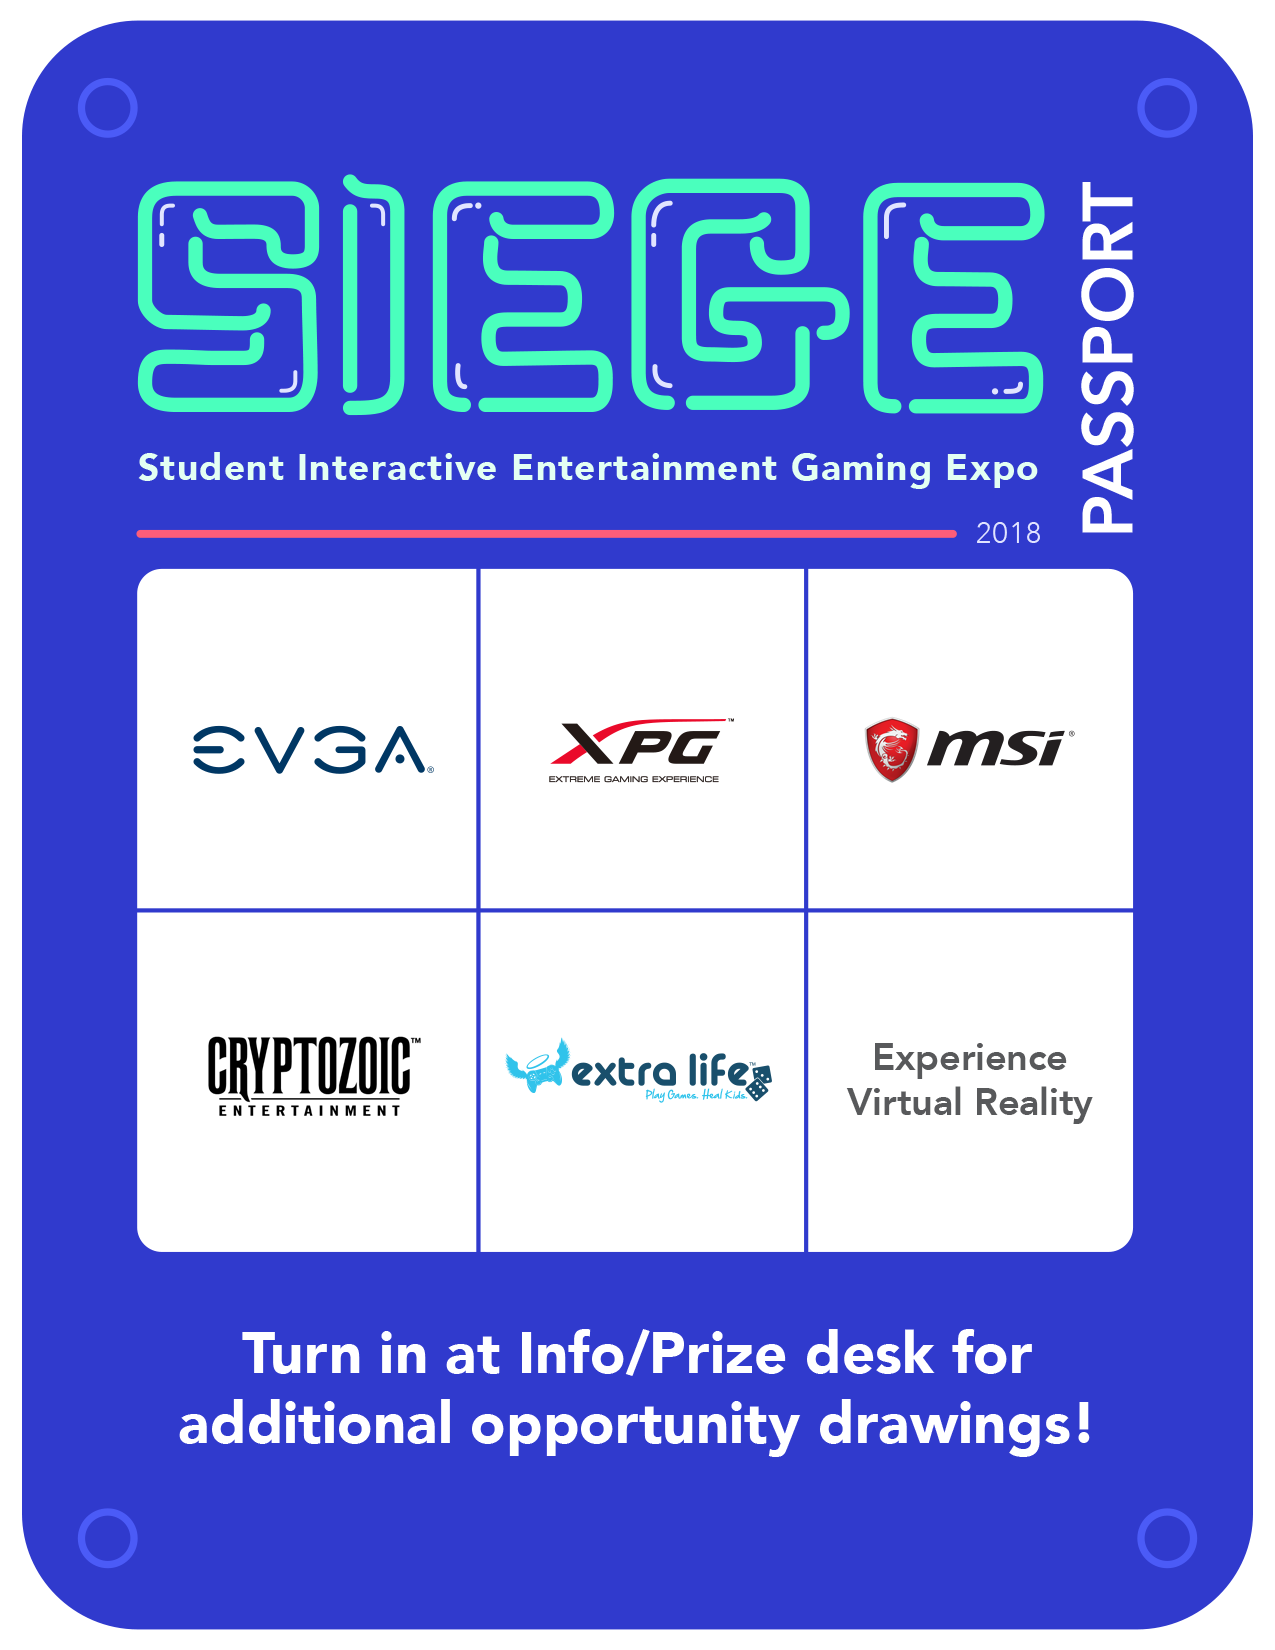 SIEGE passport, it is a stamp card made to get visitors to visit every booth.